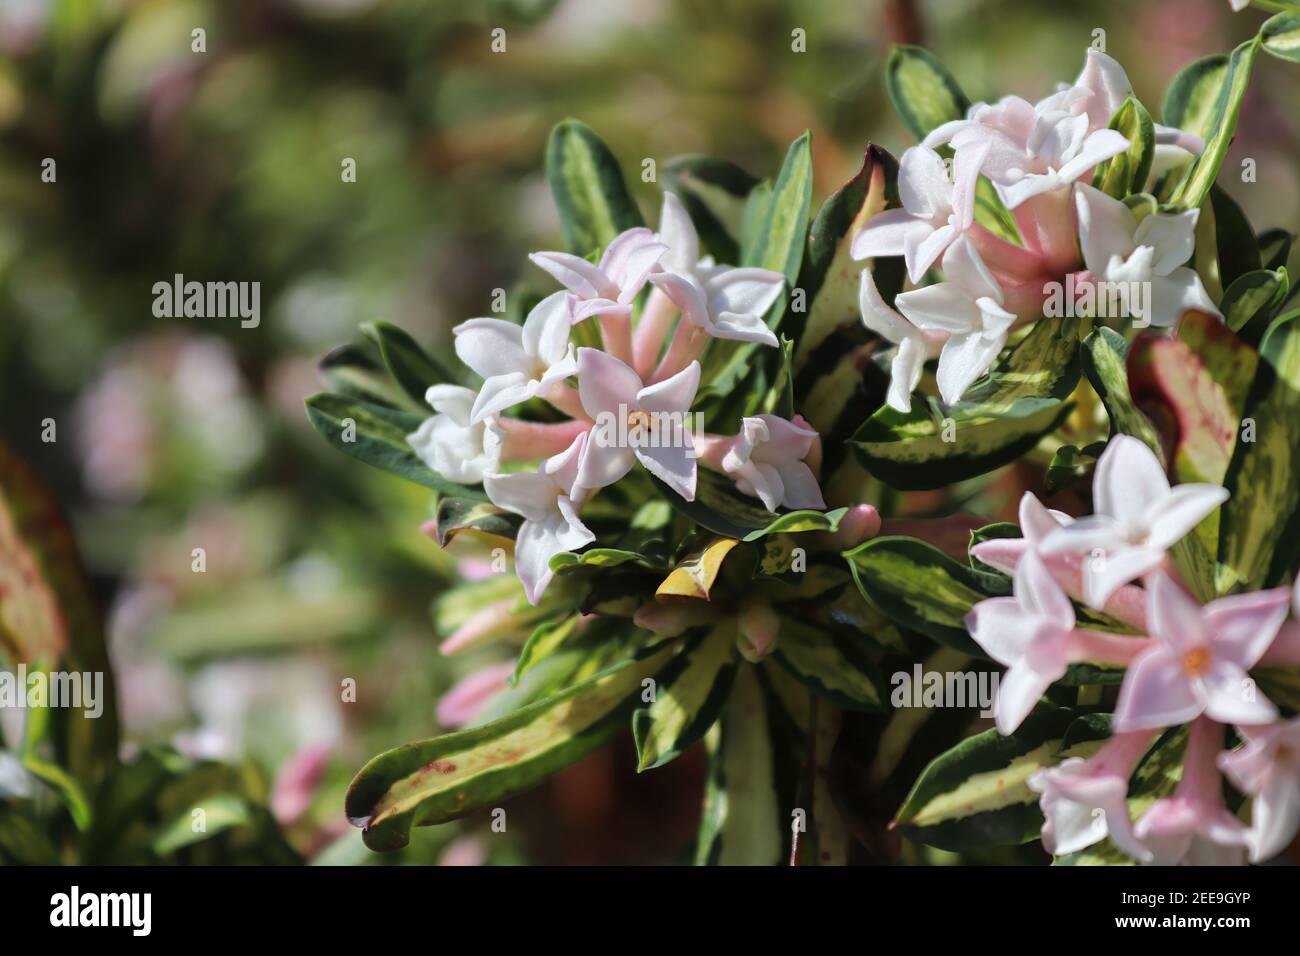 Clusters of daphne burkwoodii flower in full bloom Stock Photo